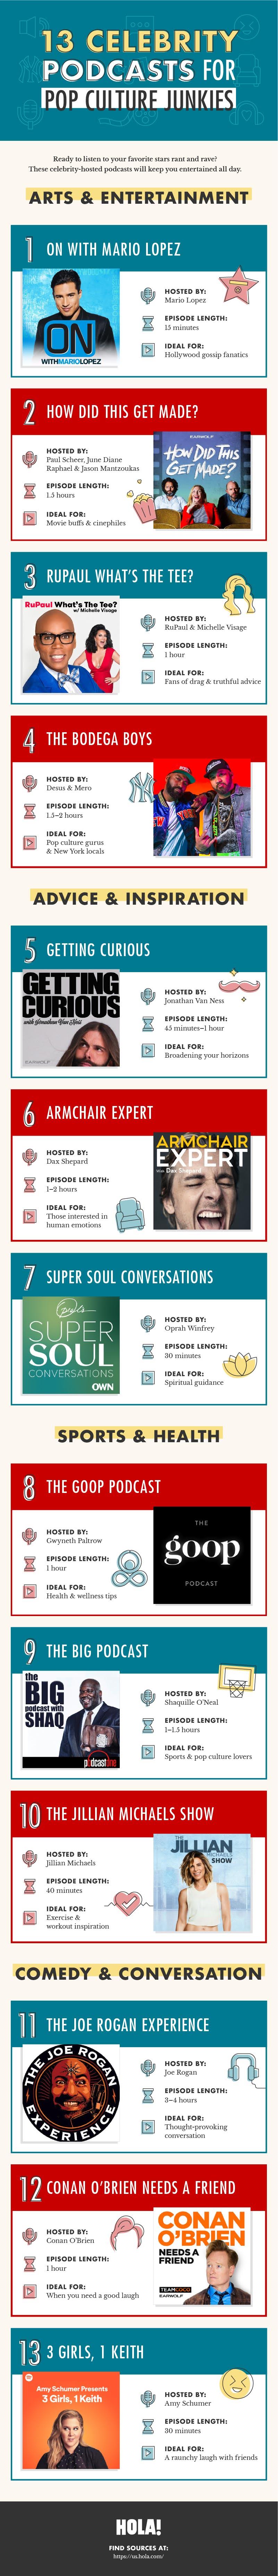 13 Celebrity Podcasts for Pop Culture Junkies #infographic